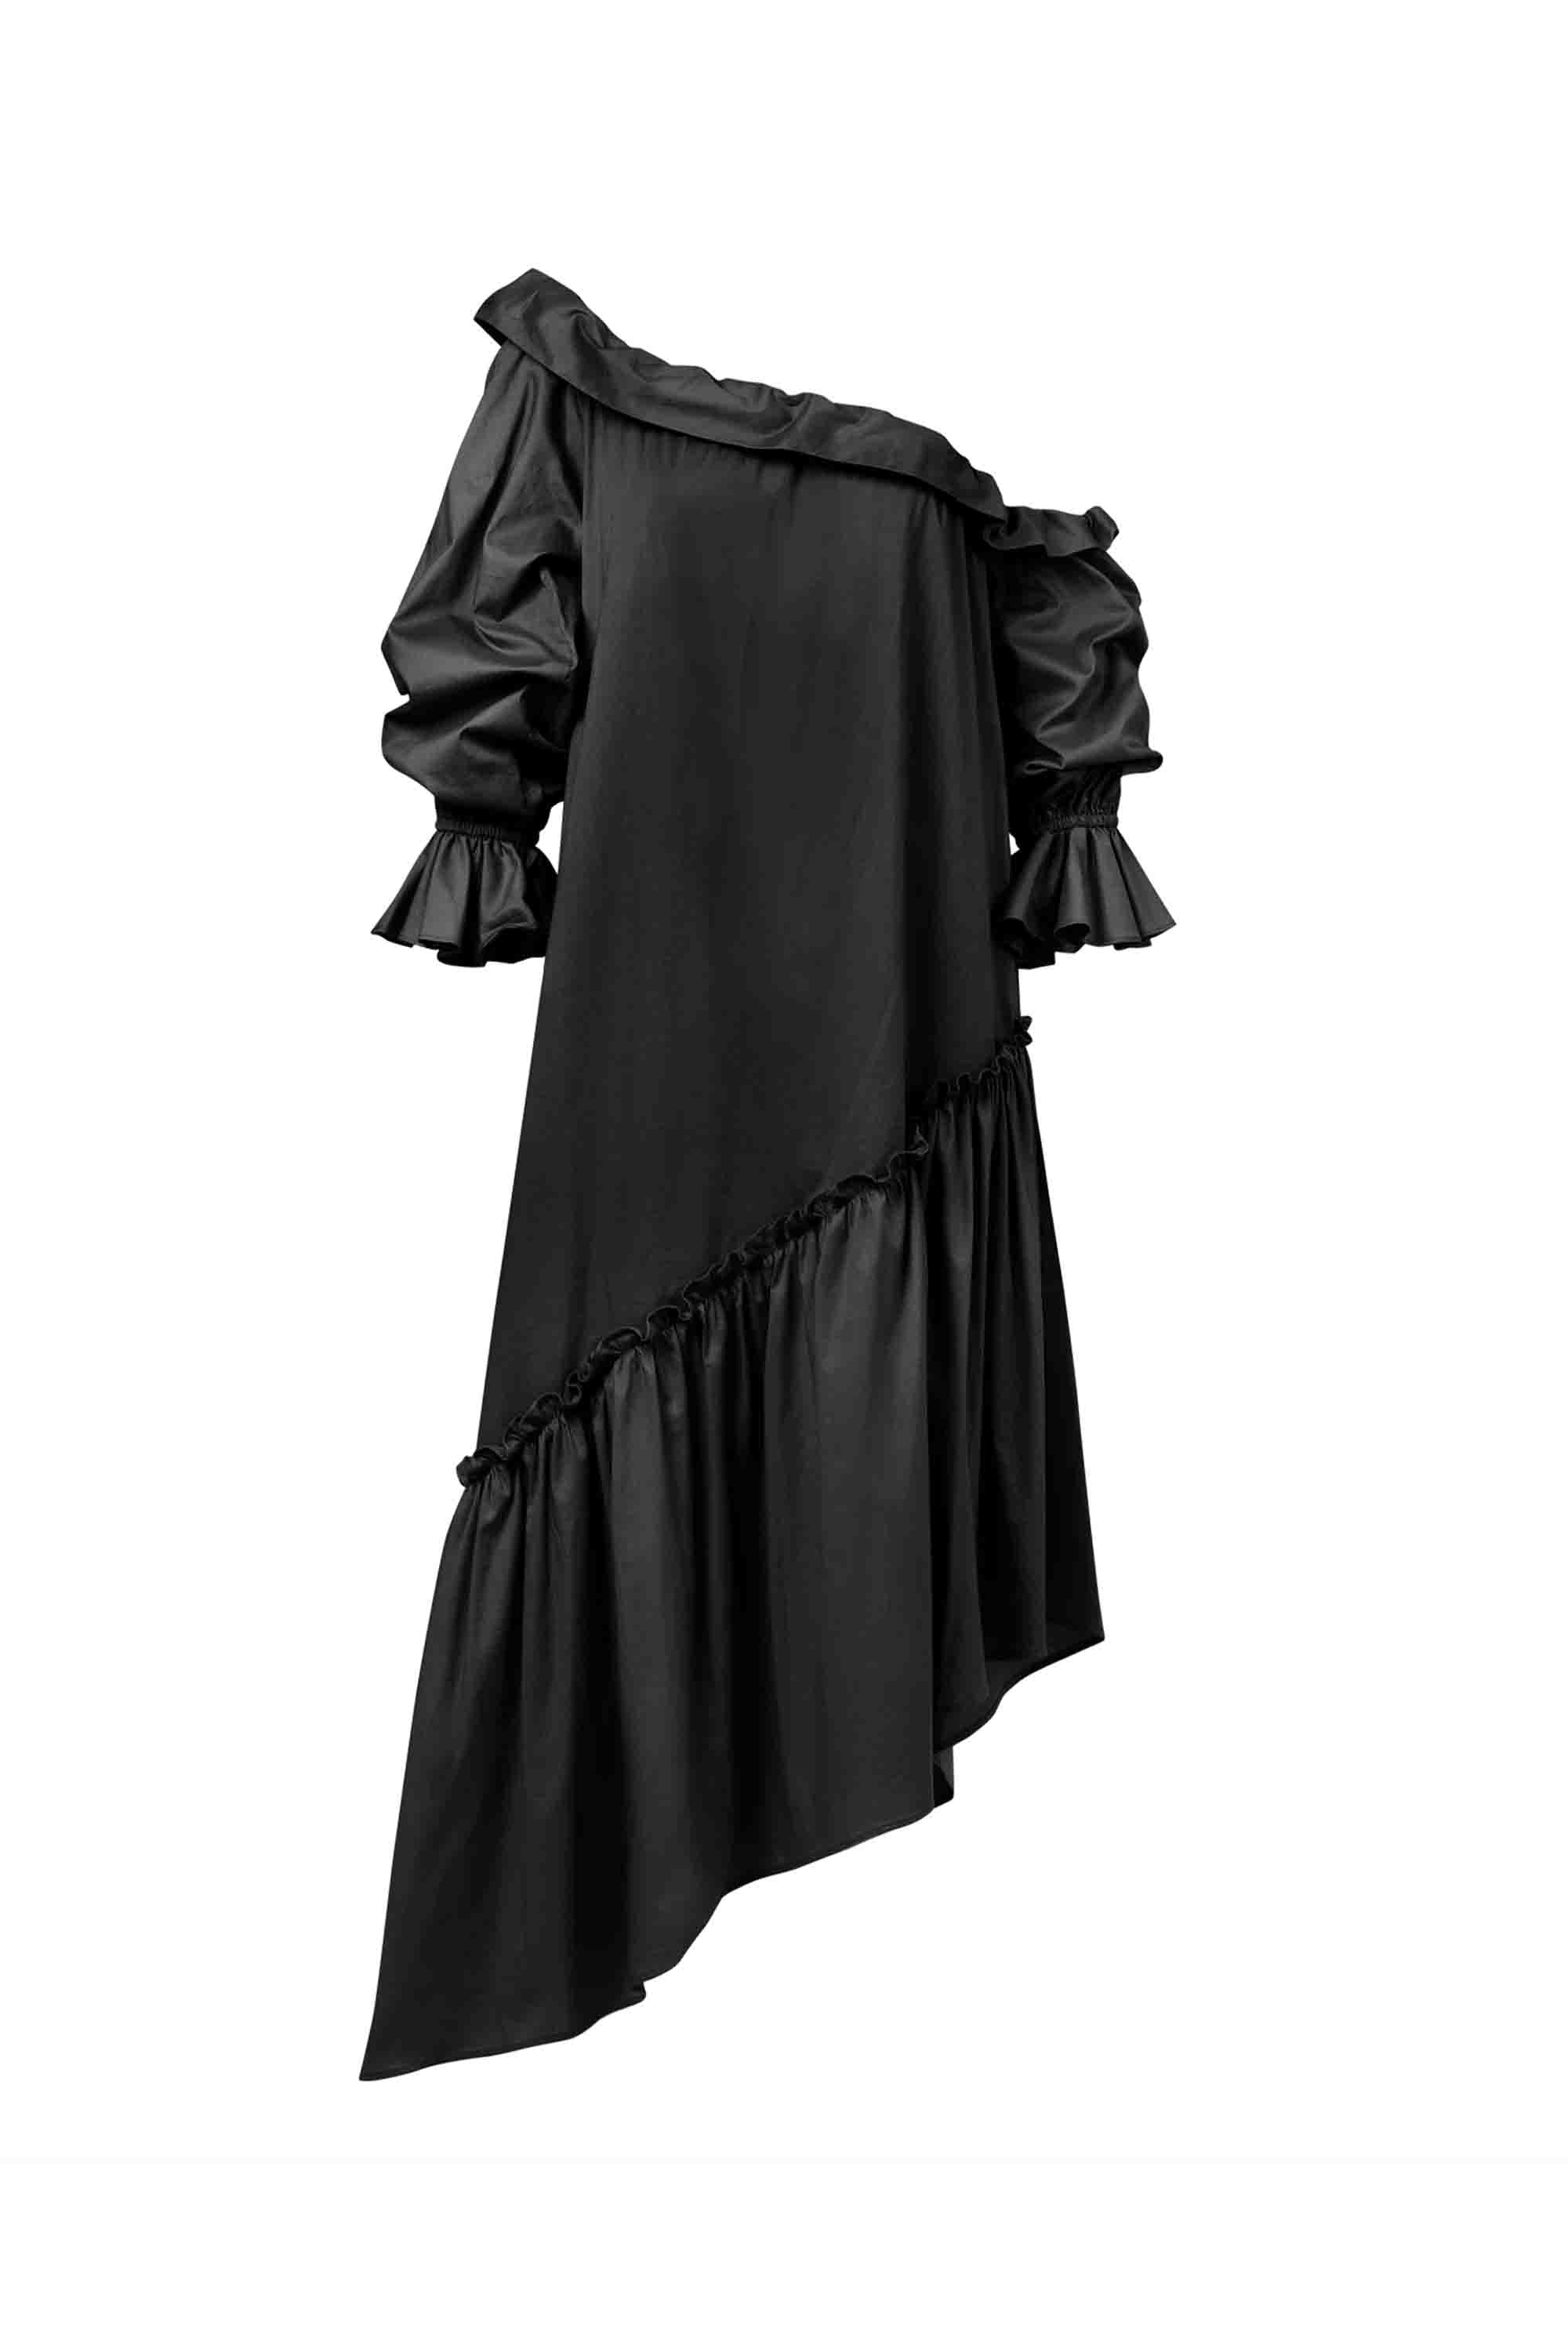 The Daydreaming Dress-Black